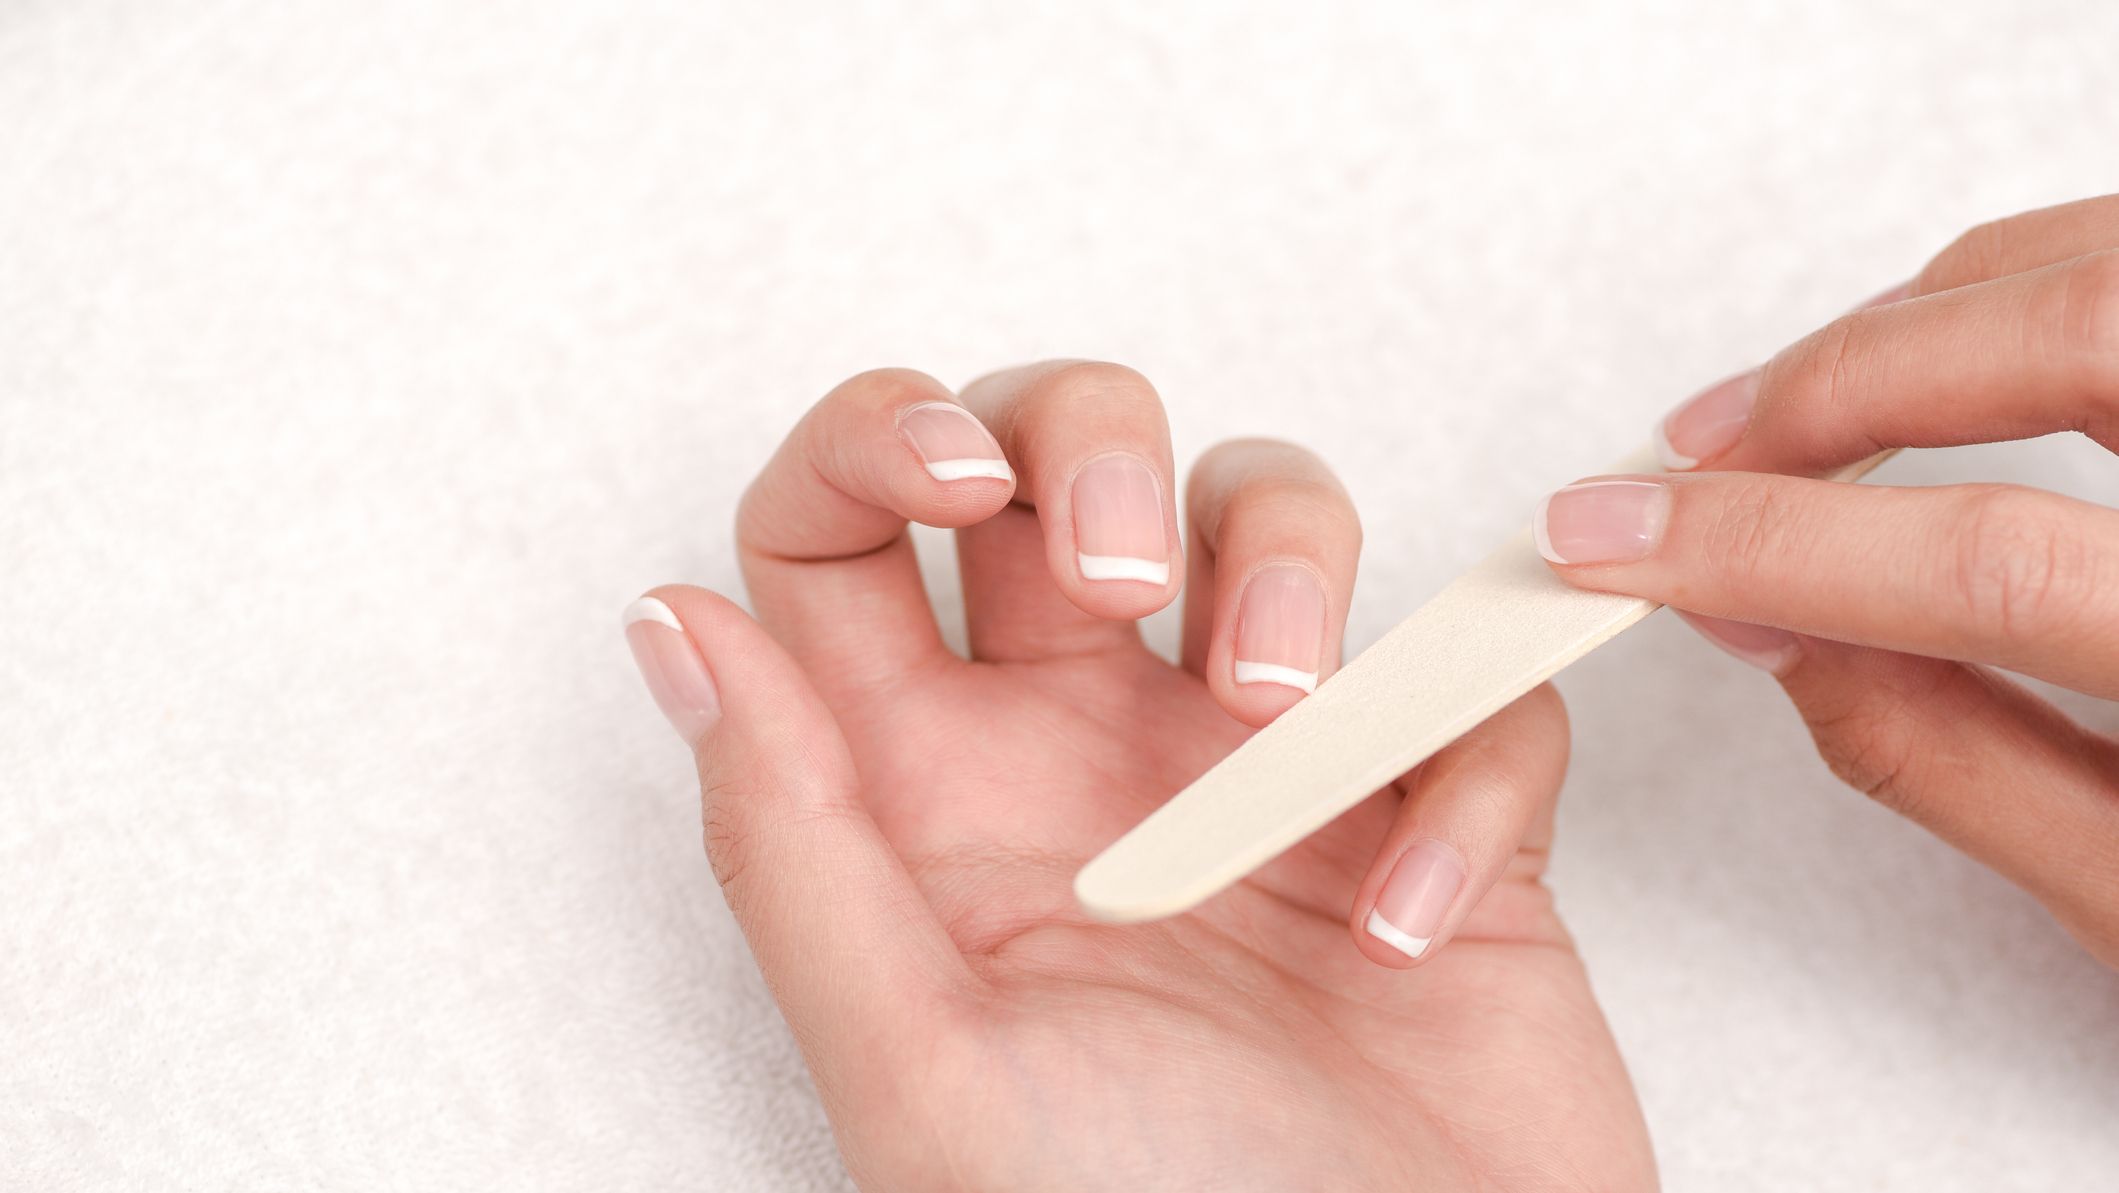 Know Your Body: Why fingernails, especially of the dominant hand, grow  faster than toenails